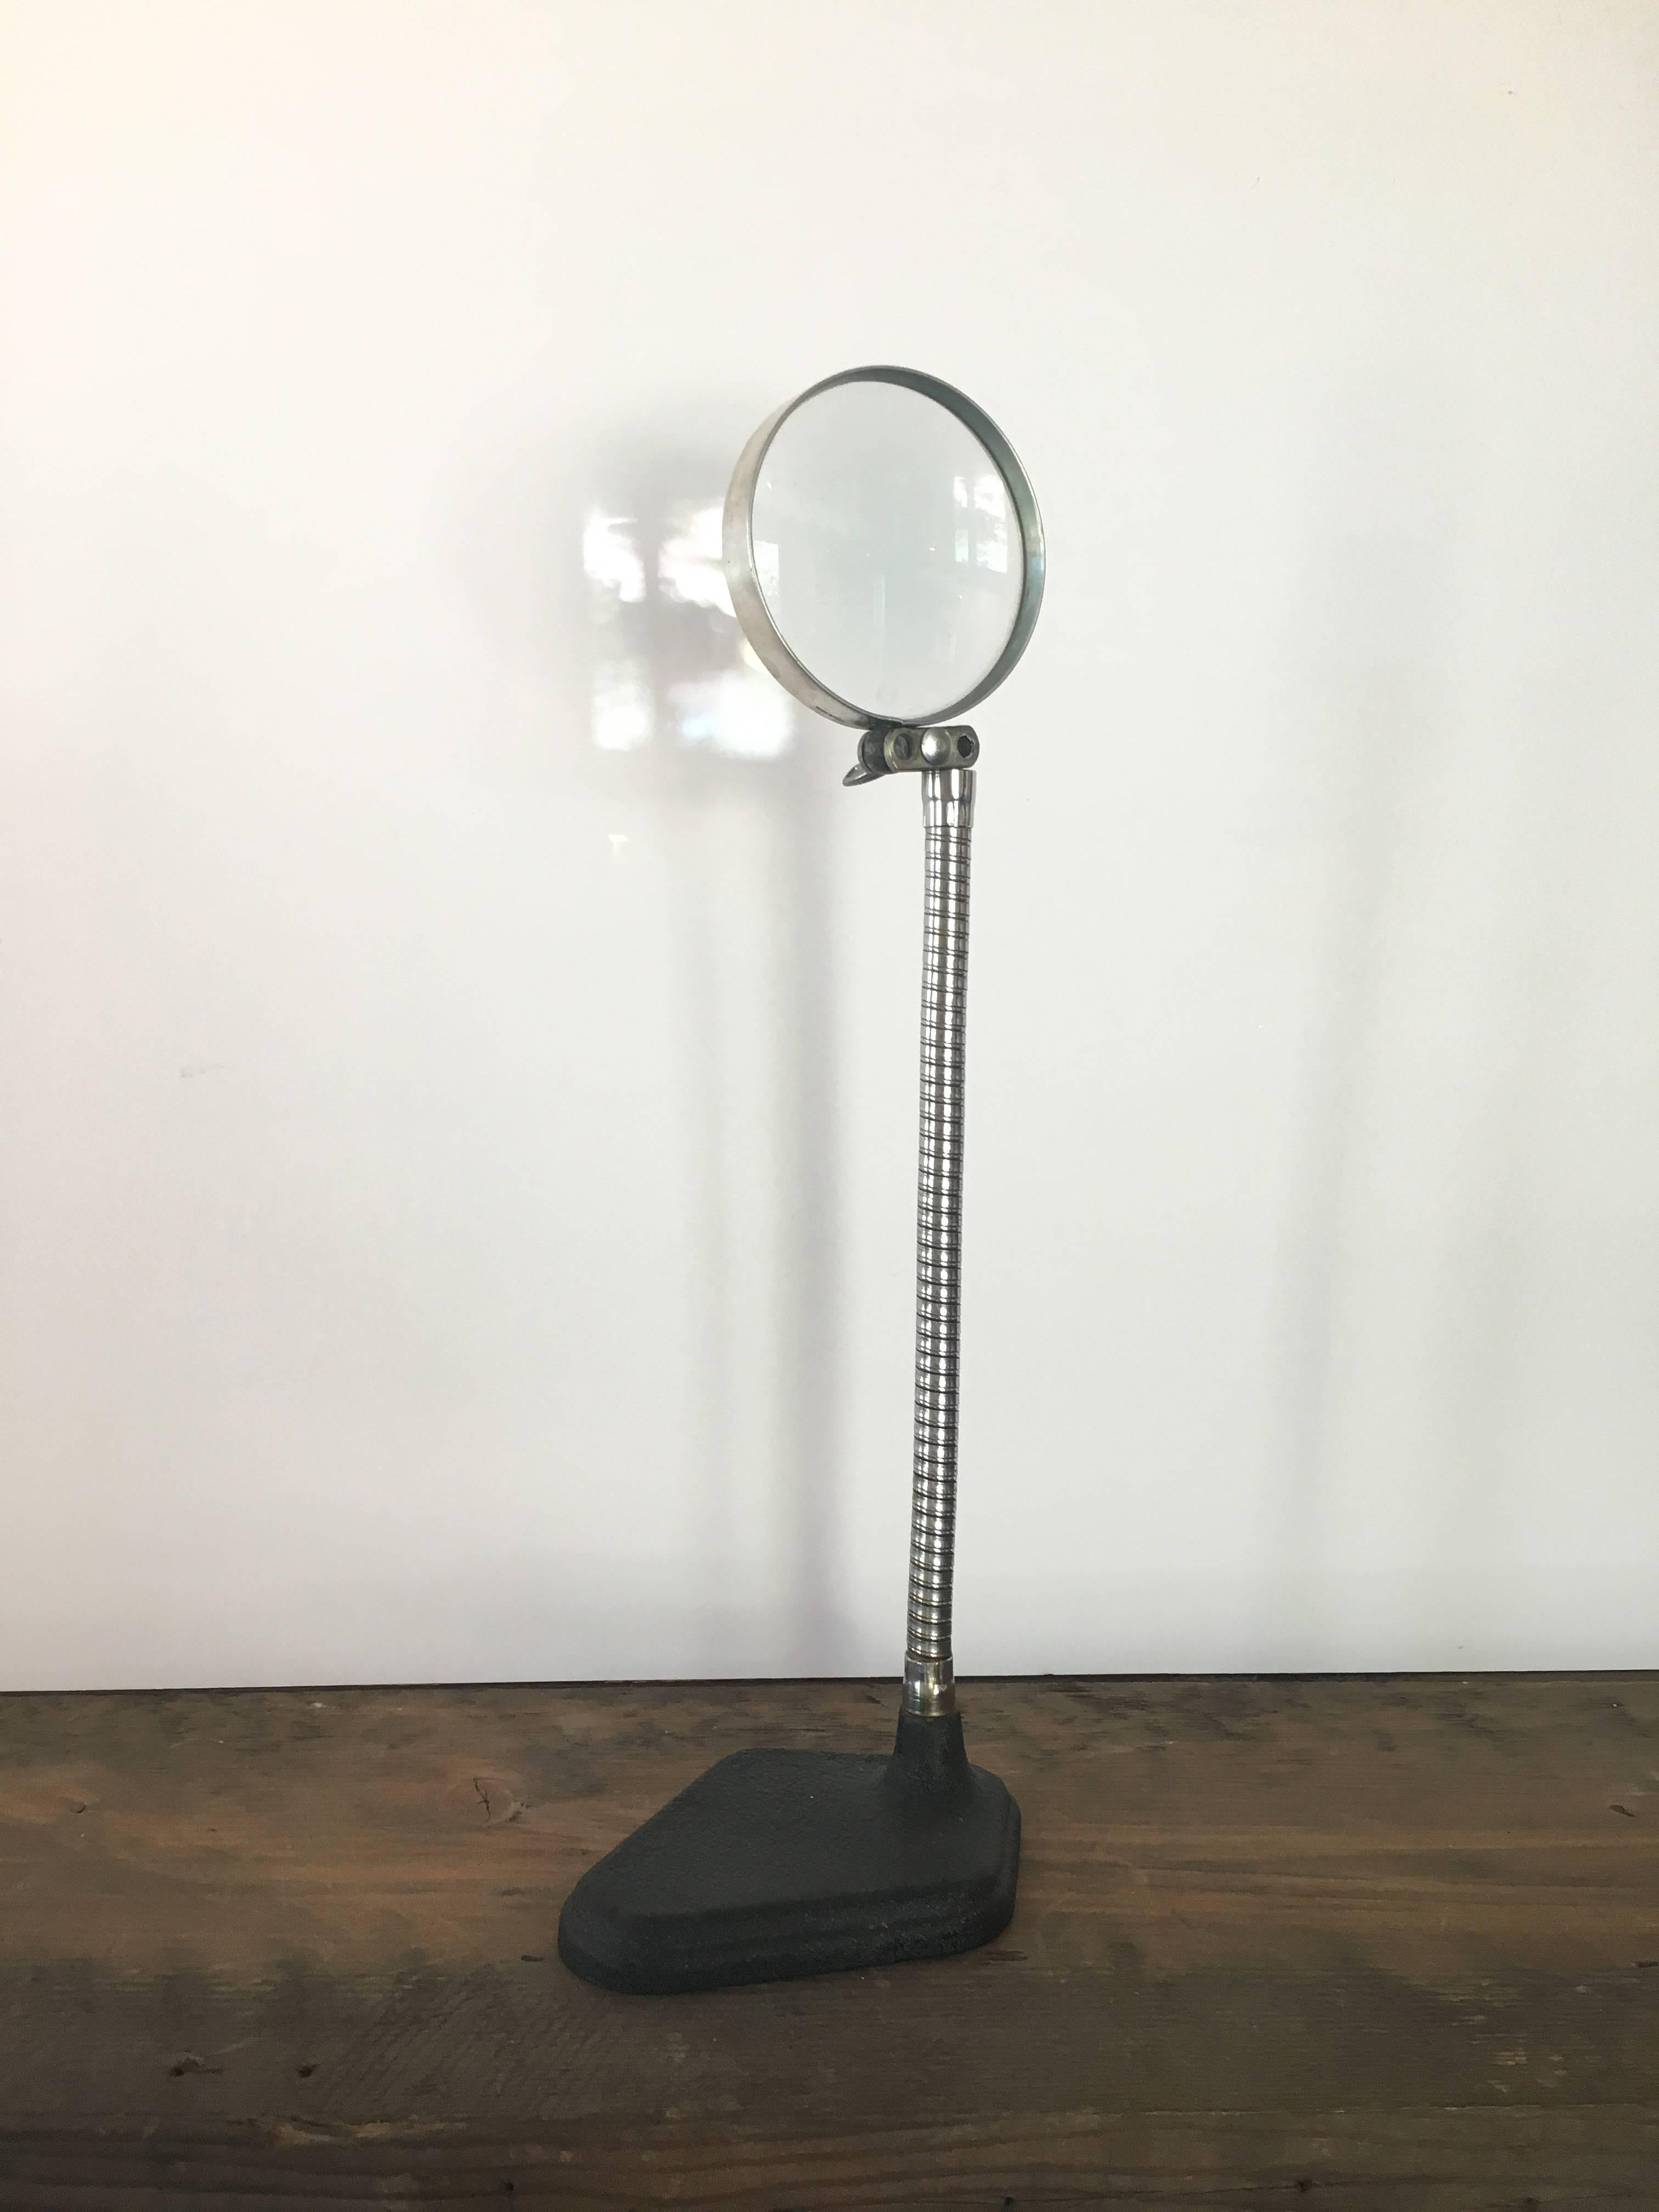 Free-standing vintage magnifying glass. American, circa 20th century. Curving articulated arm on pebbled black base.